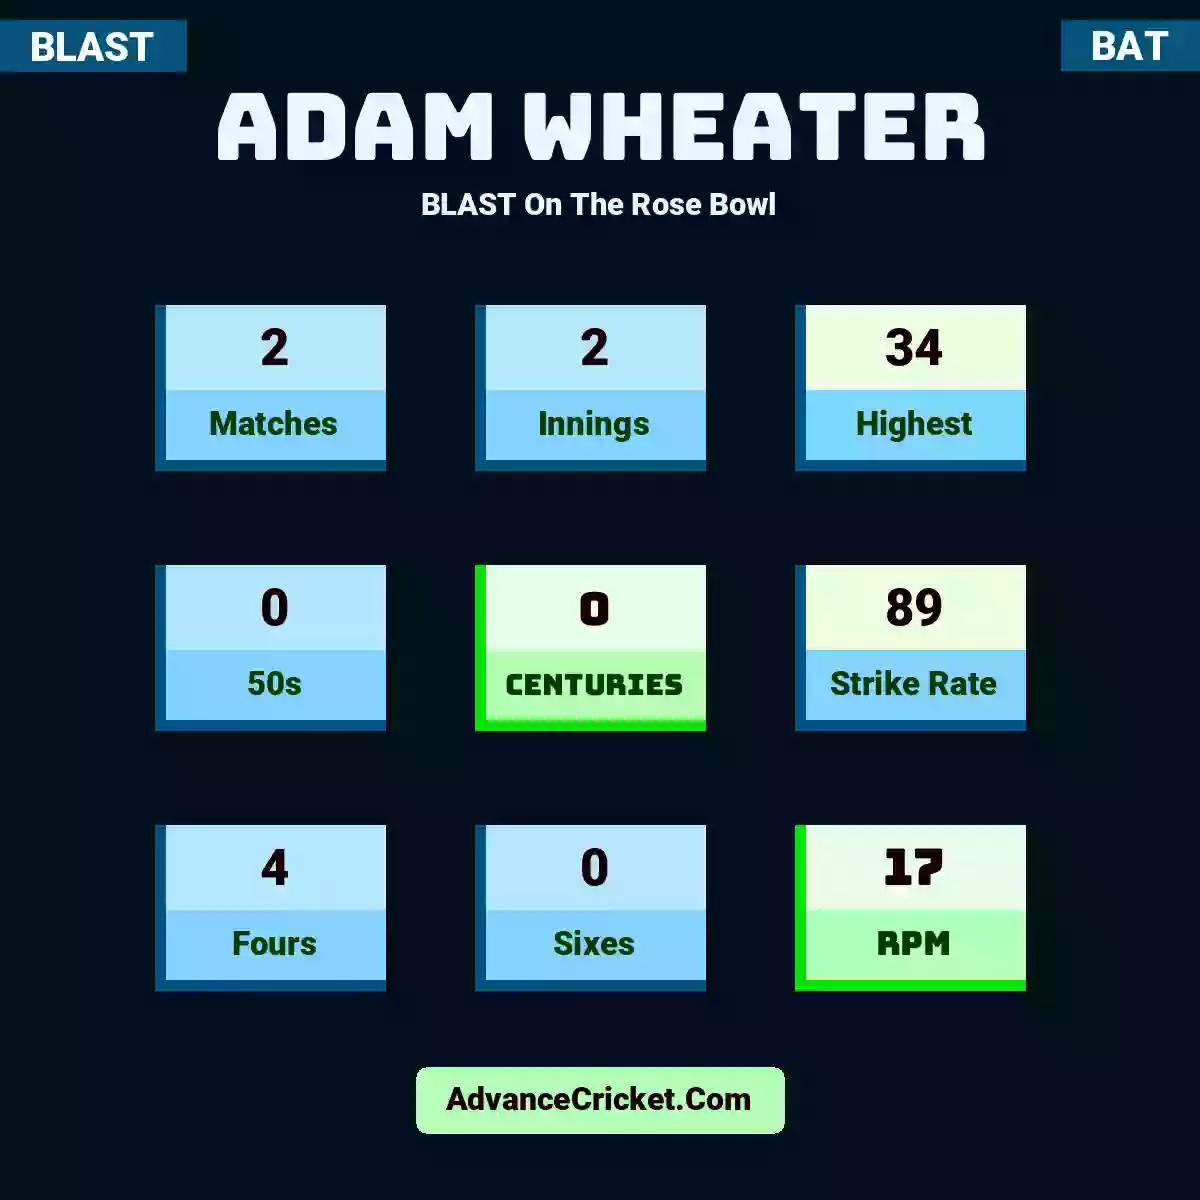 Adam Wheater BLAST  On The Rose Bowl, Adam Wheater played 2 matches, scored 34 runs as highest, 0 half-centuries, and 0 centuries, with a strike rate of 89. A.Wheater hit 4 fours and 0 sixes, with an RPM of 17.